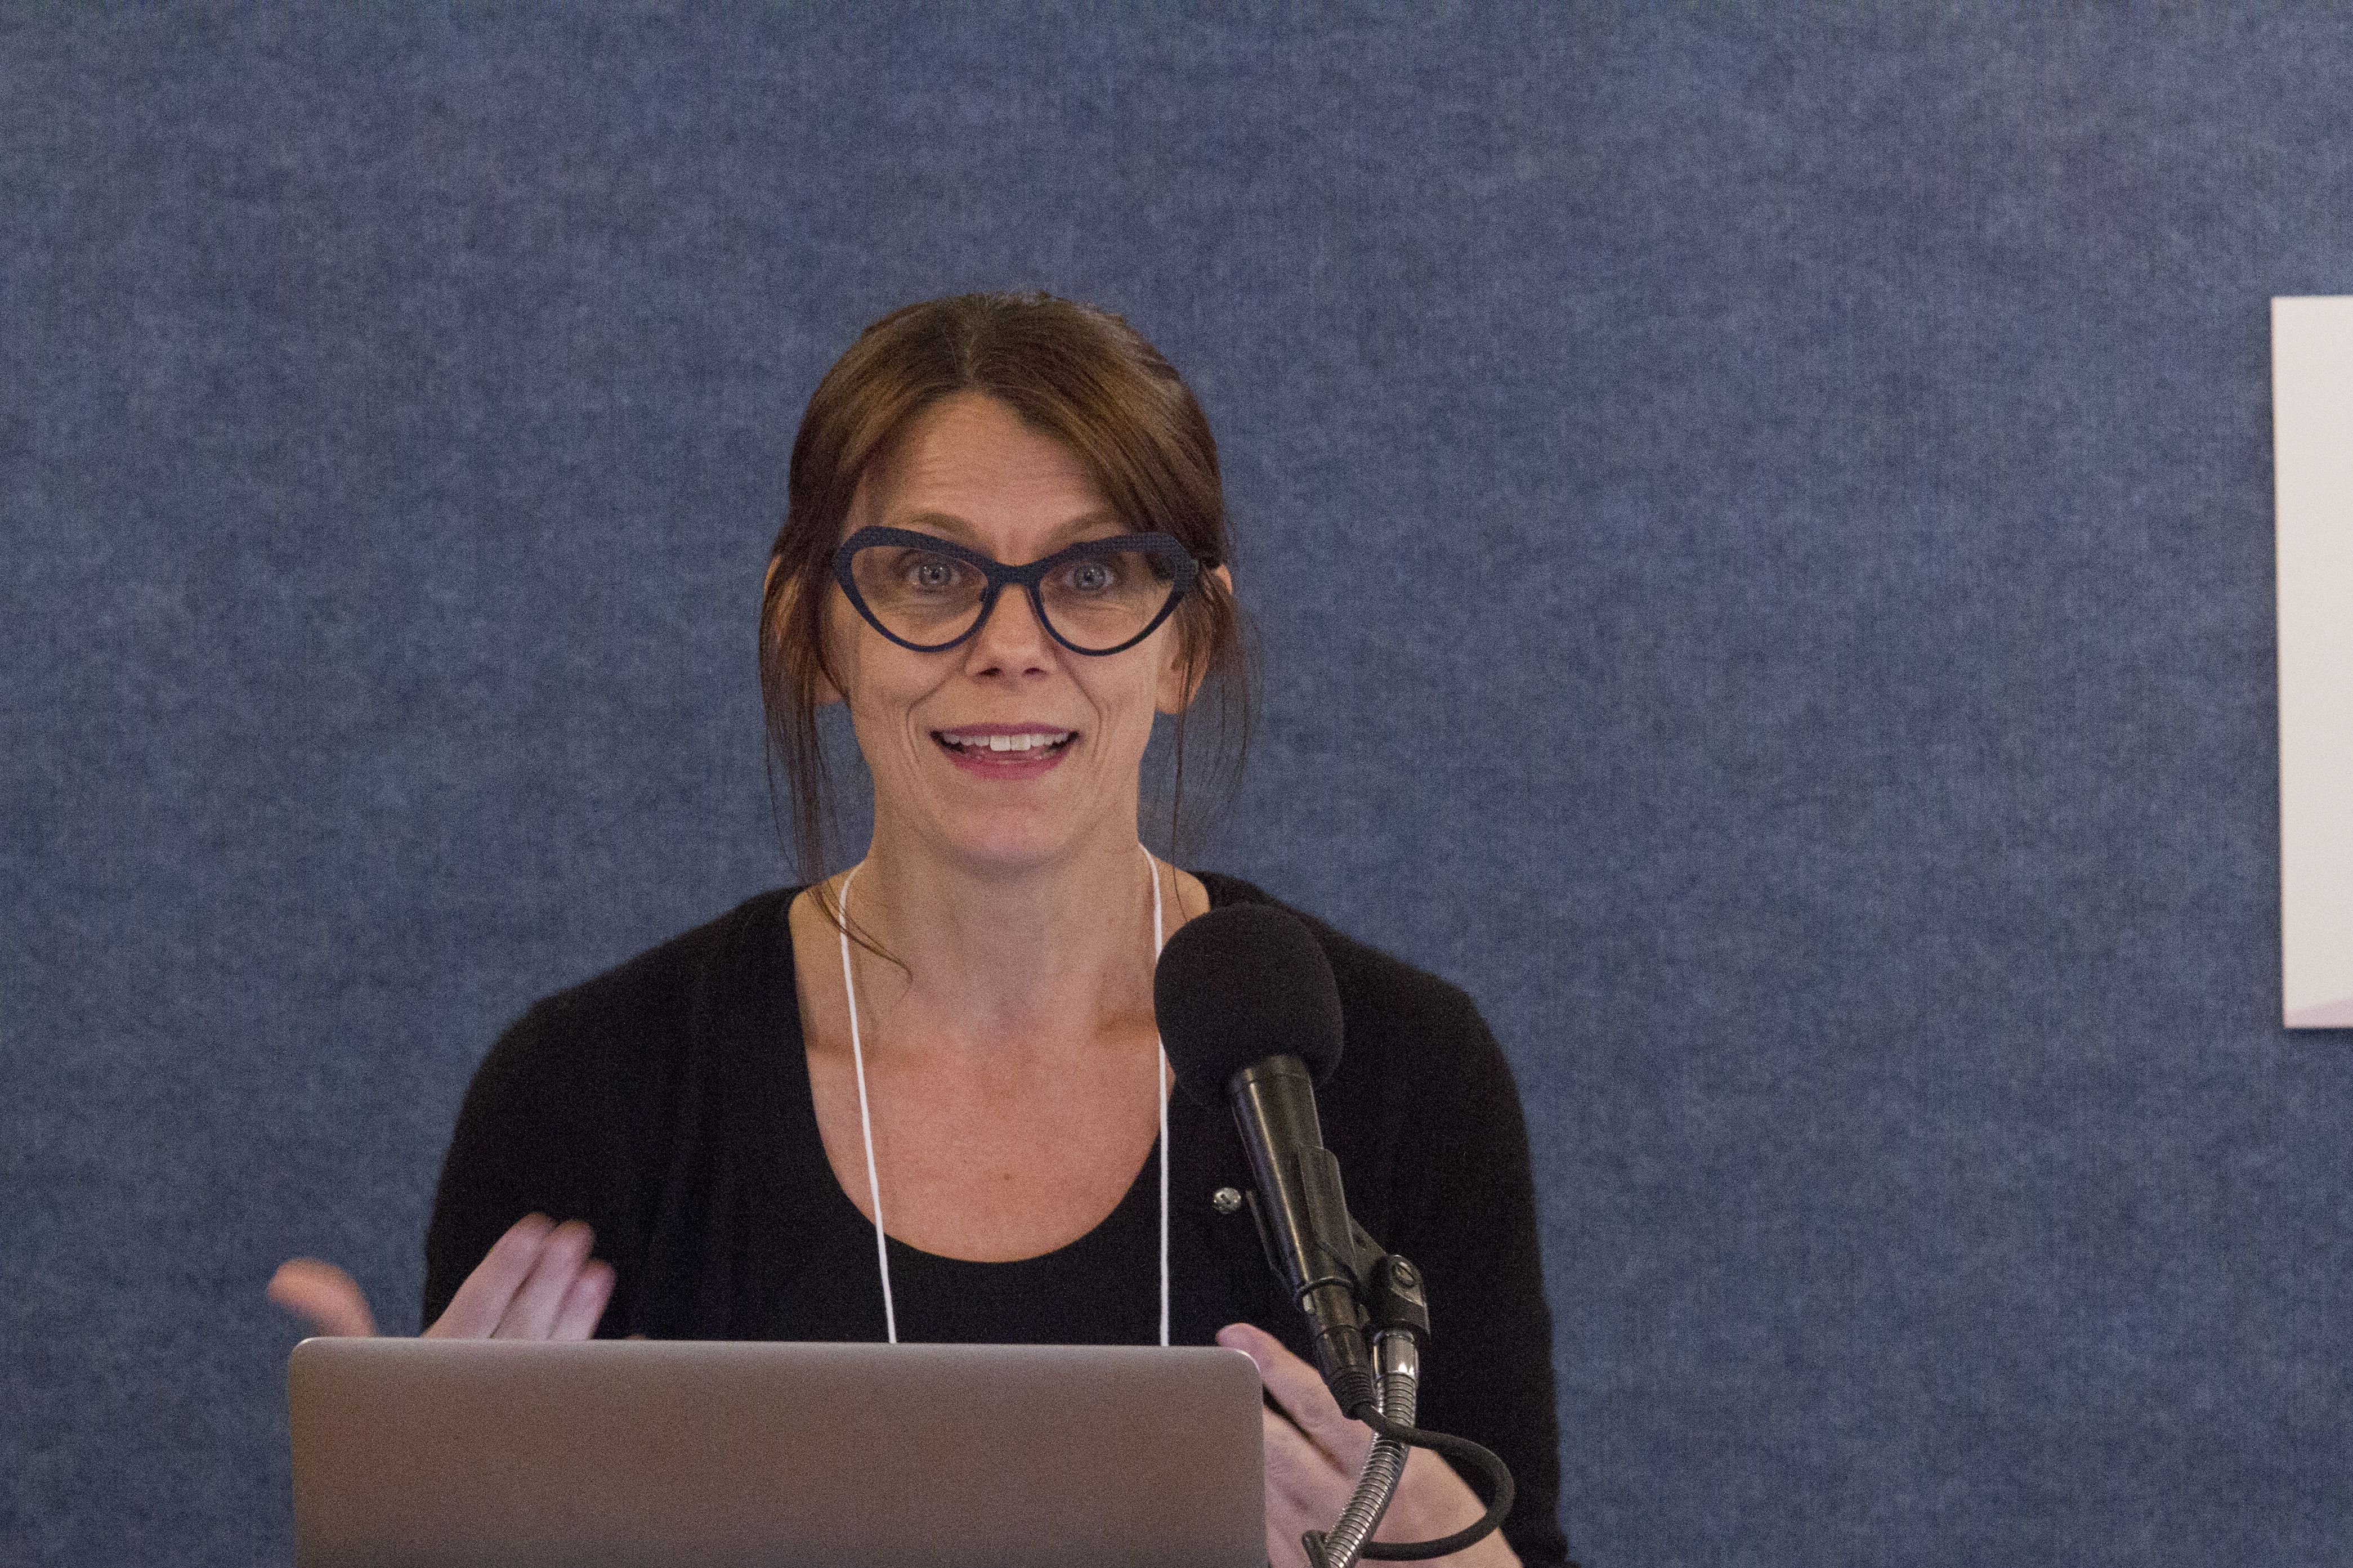 Jennifer Beard explains her study on HIV rates amongst sex workers and their boyfriends in Ghana, at the Pulitzer Center Gender Lens Conference. Image by Jin Ding. United States, 2017. 